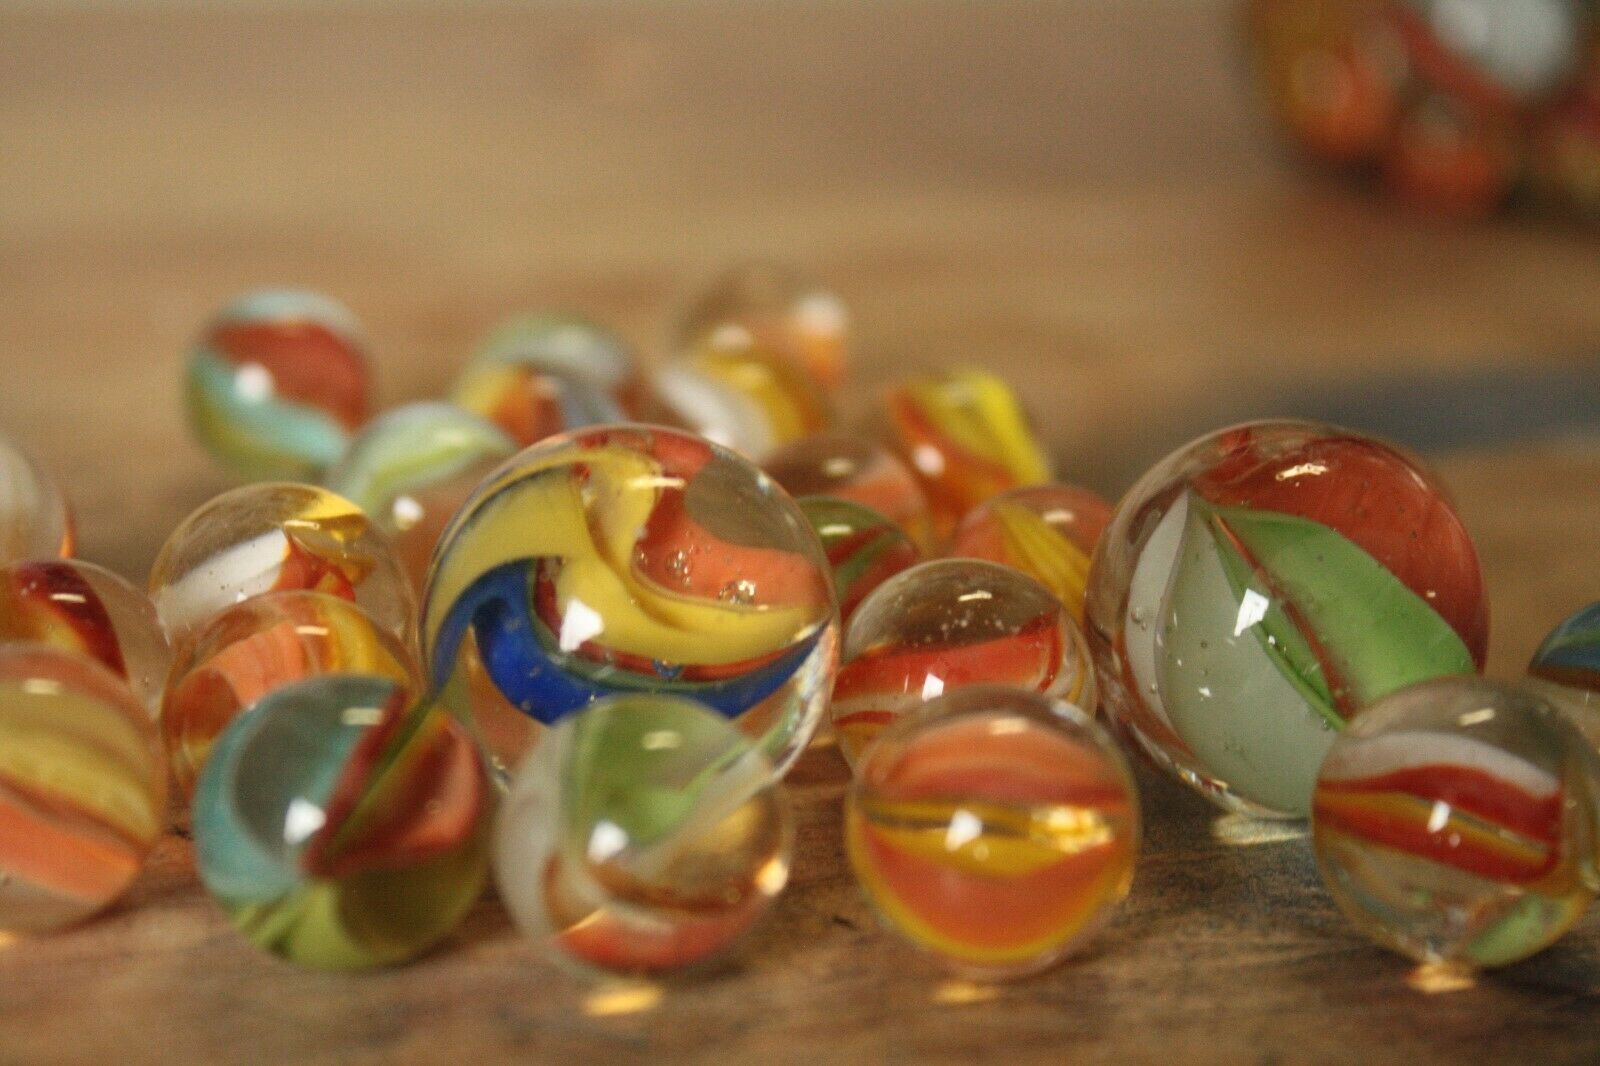 Official Mega Marbles (vacor) Premium Cats Eye Marbles (canicas Surtidas)!